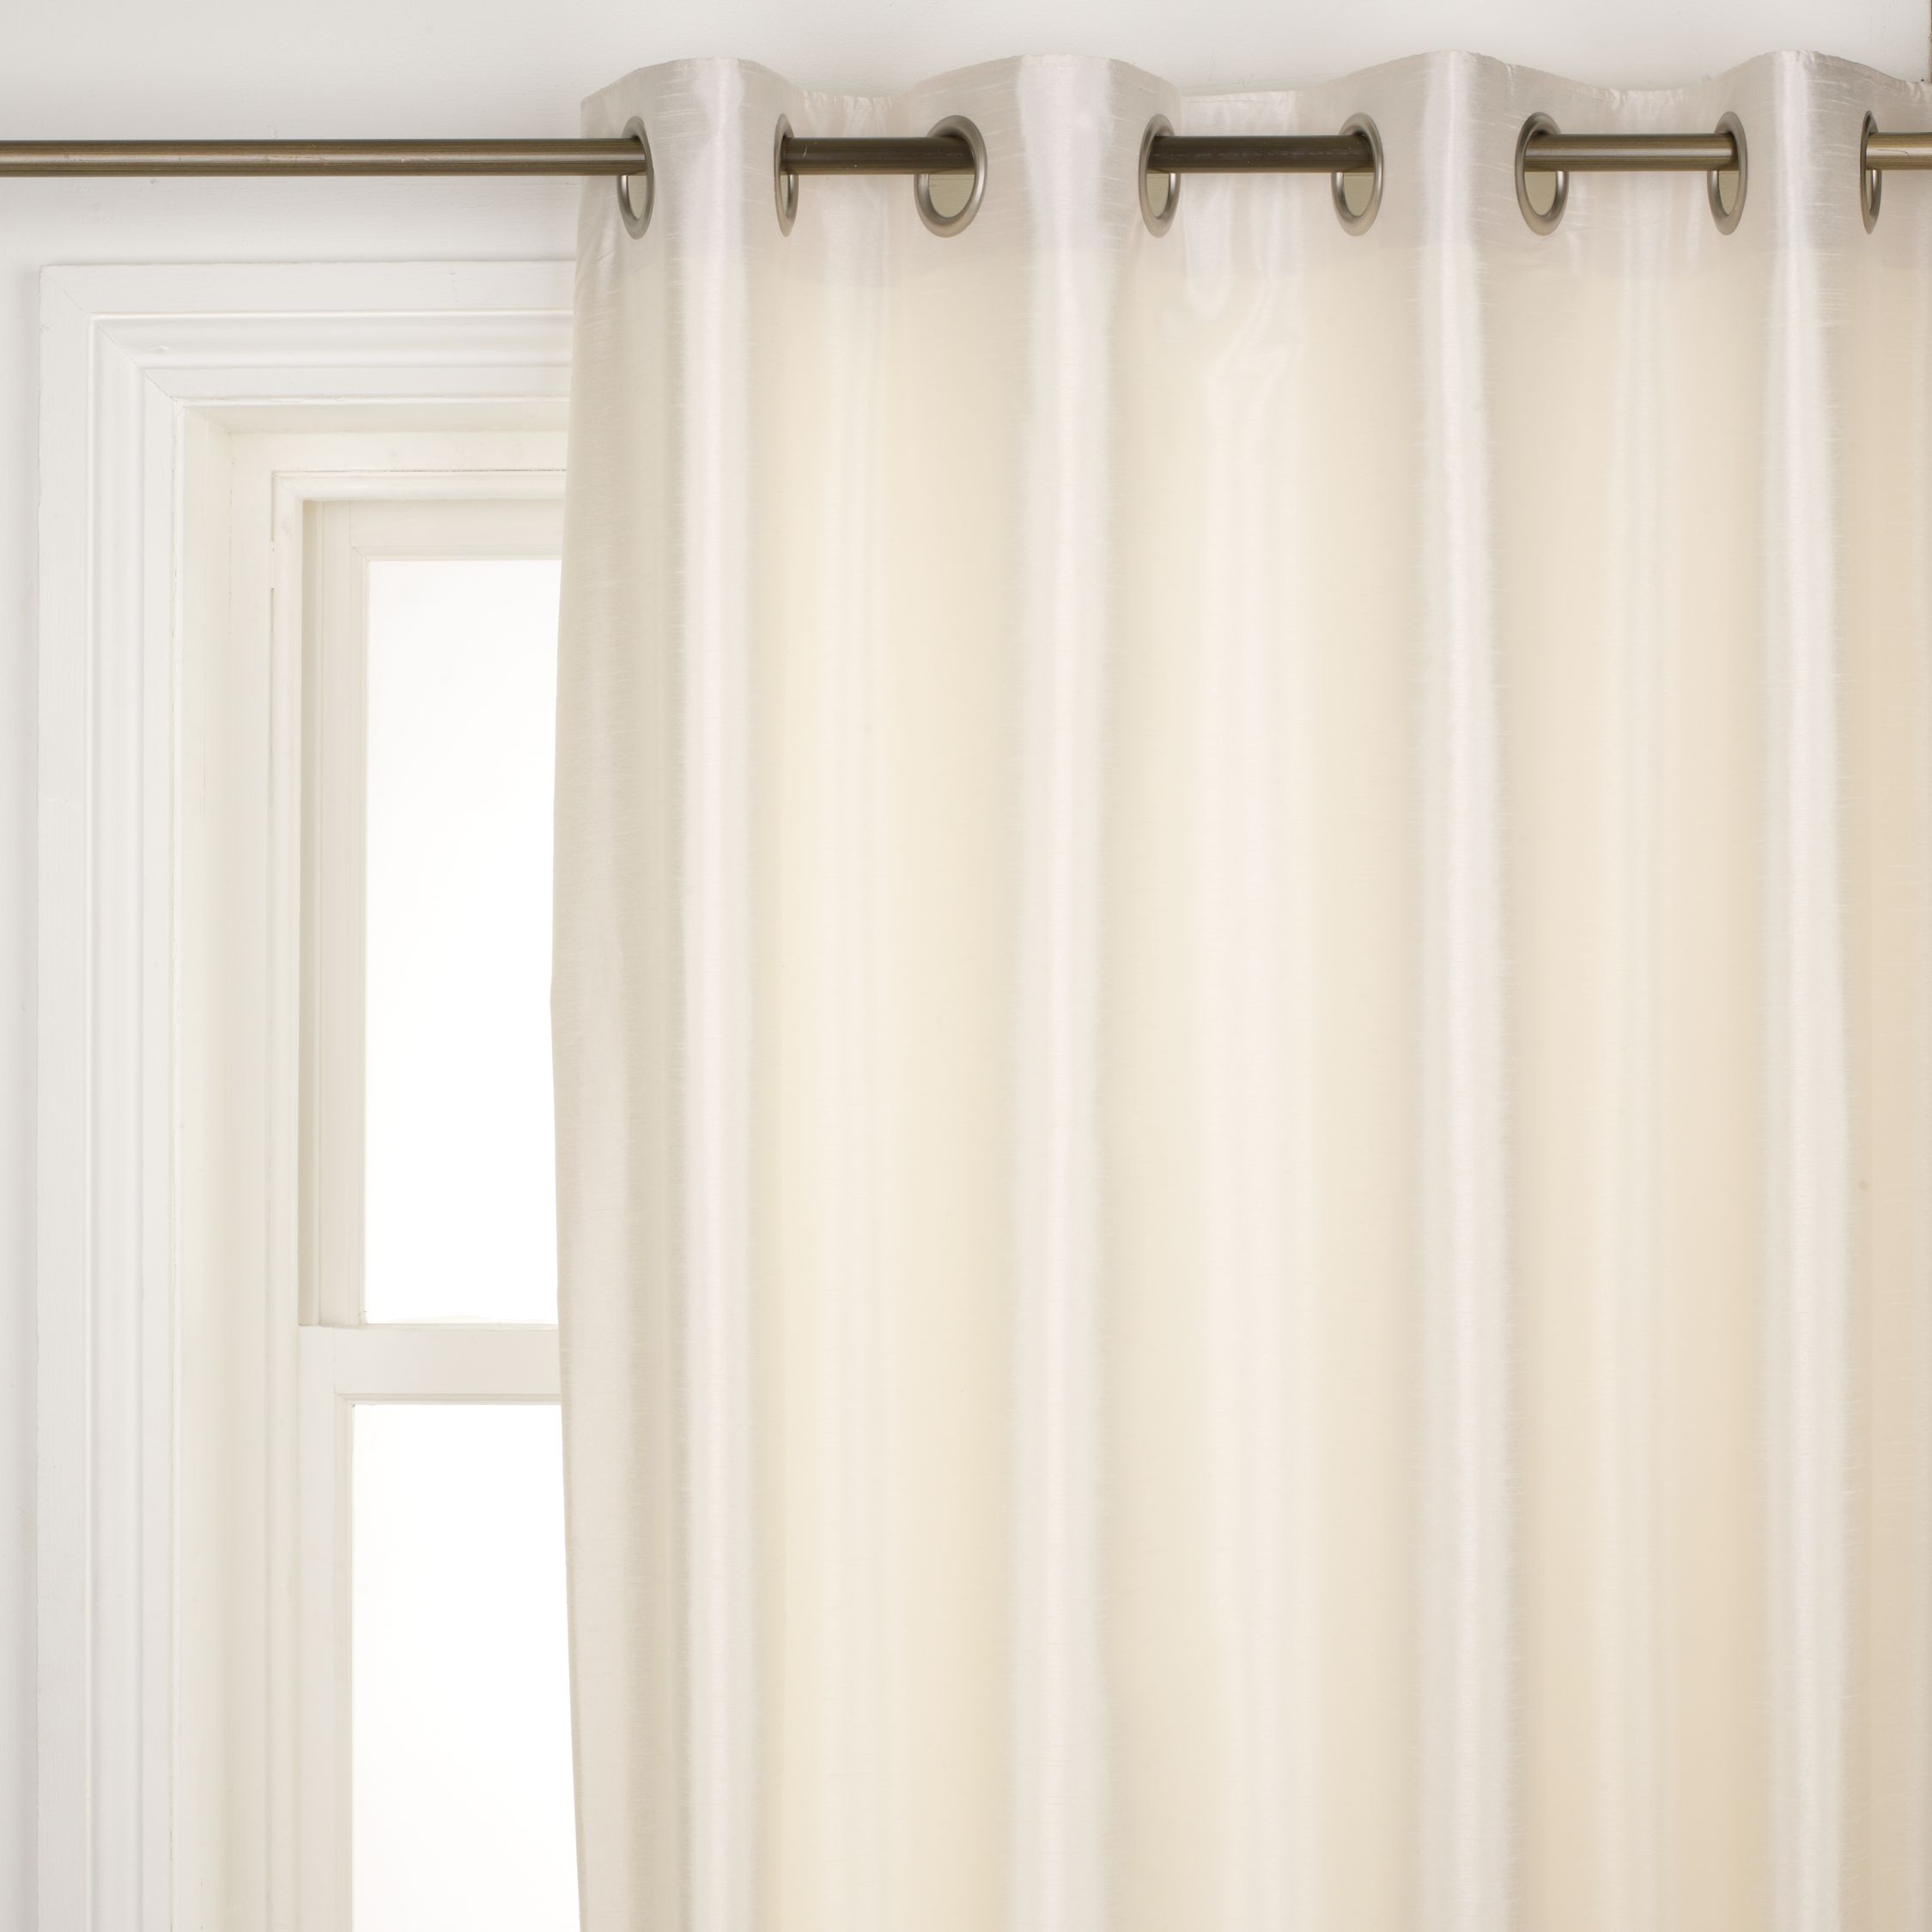 Faux Silk Eyelet Curtains, Oyster